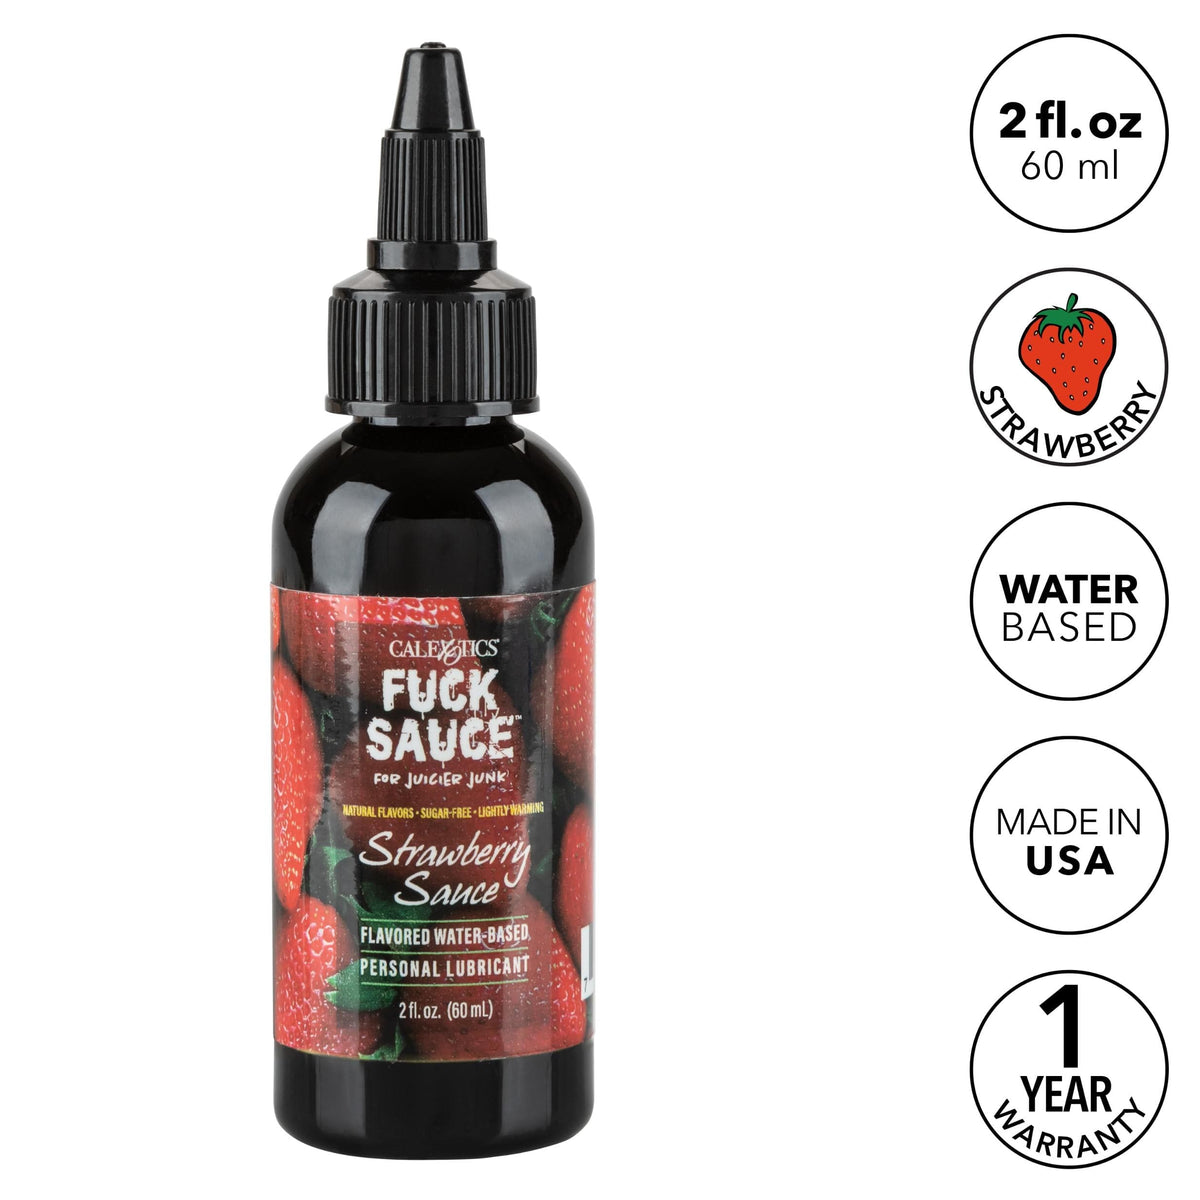 fuck sauce flavored water based personal lubricant strawberry 2 fl oz